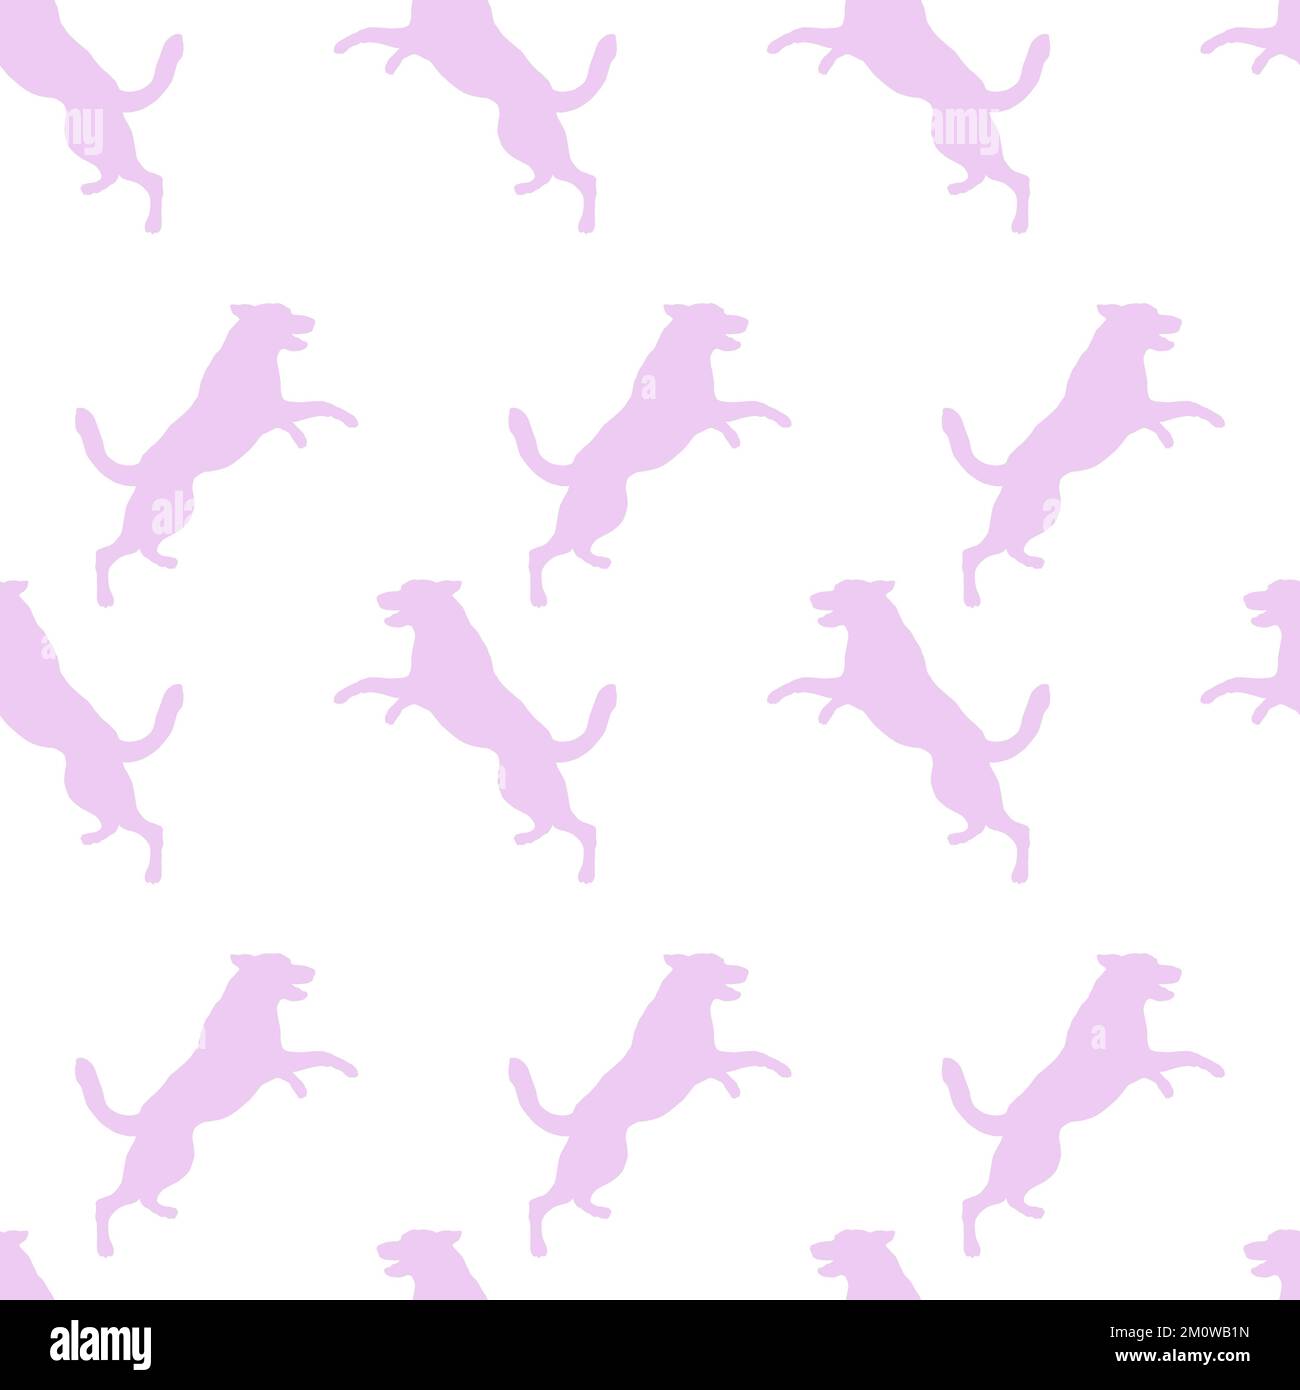 Seamless pattern. Jumping east european shepherd puppy isolated on white background. Dog silhouette. Endless texture. Design for wallpaper, fabric. Stock Vector